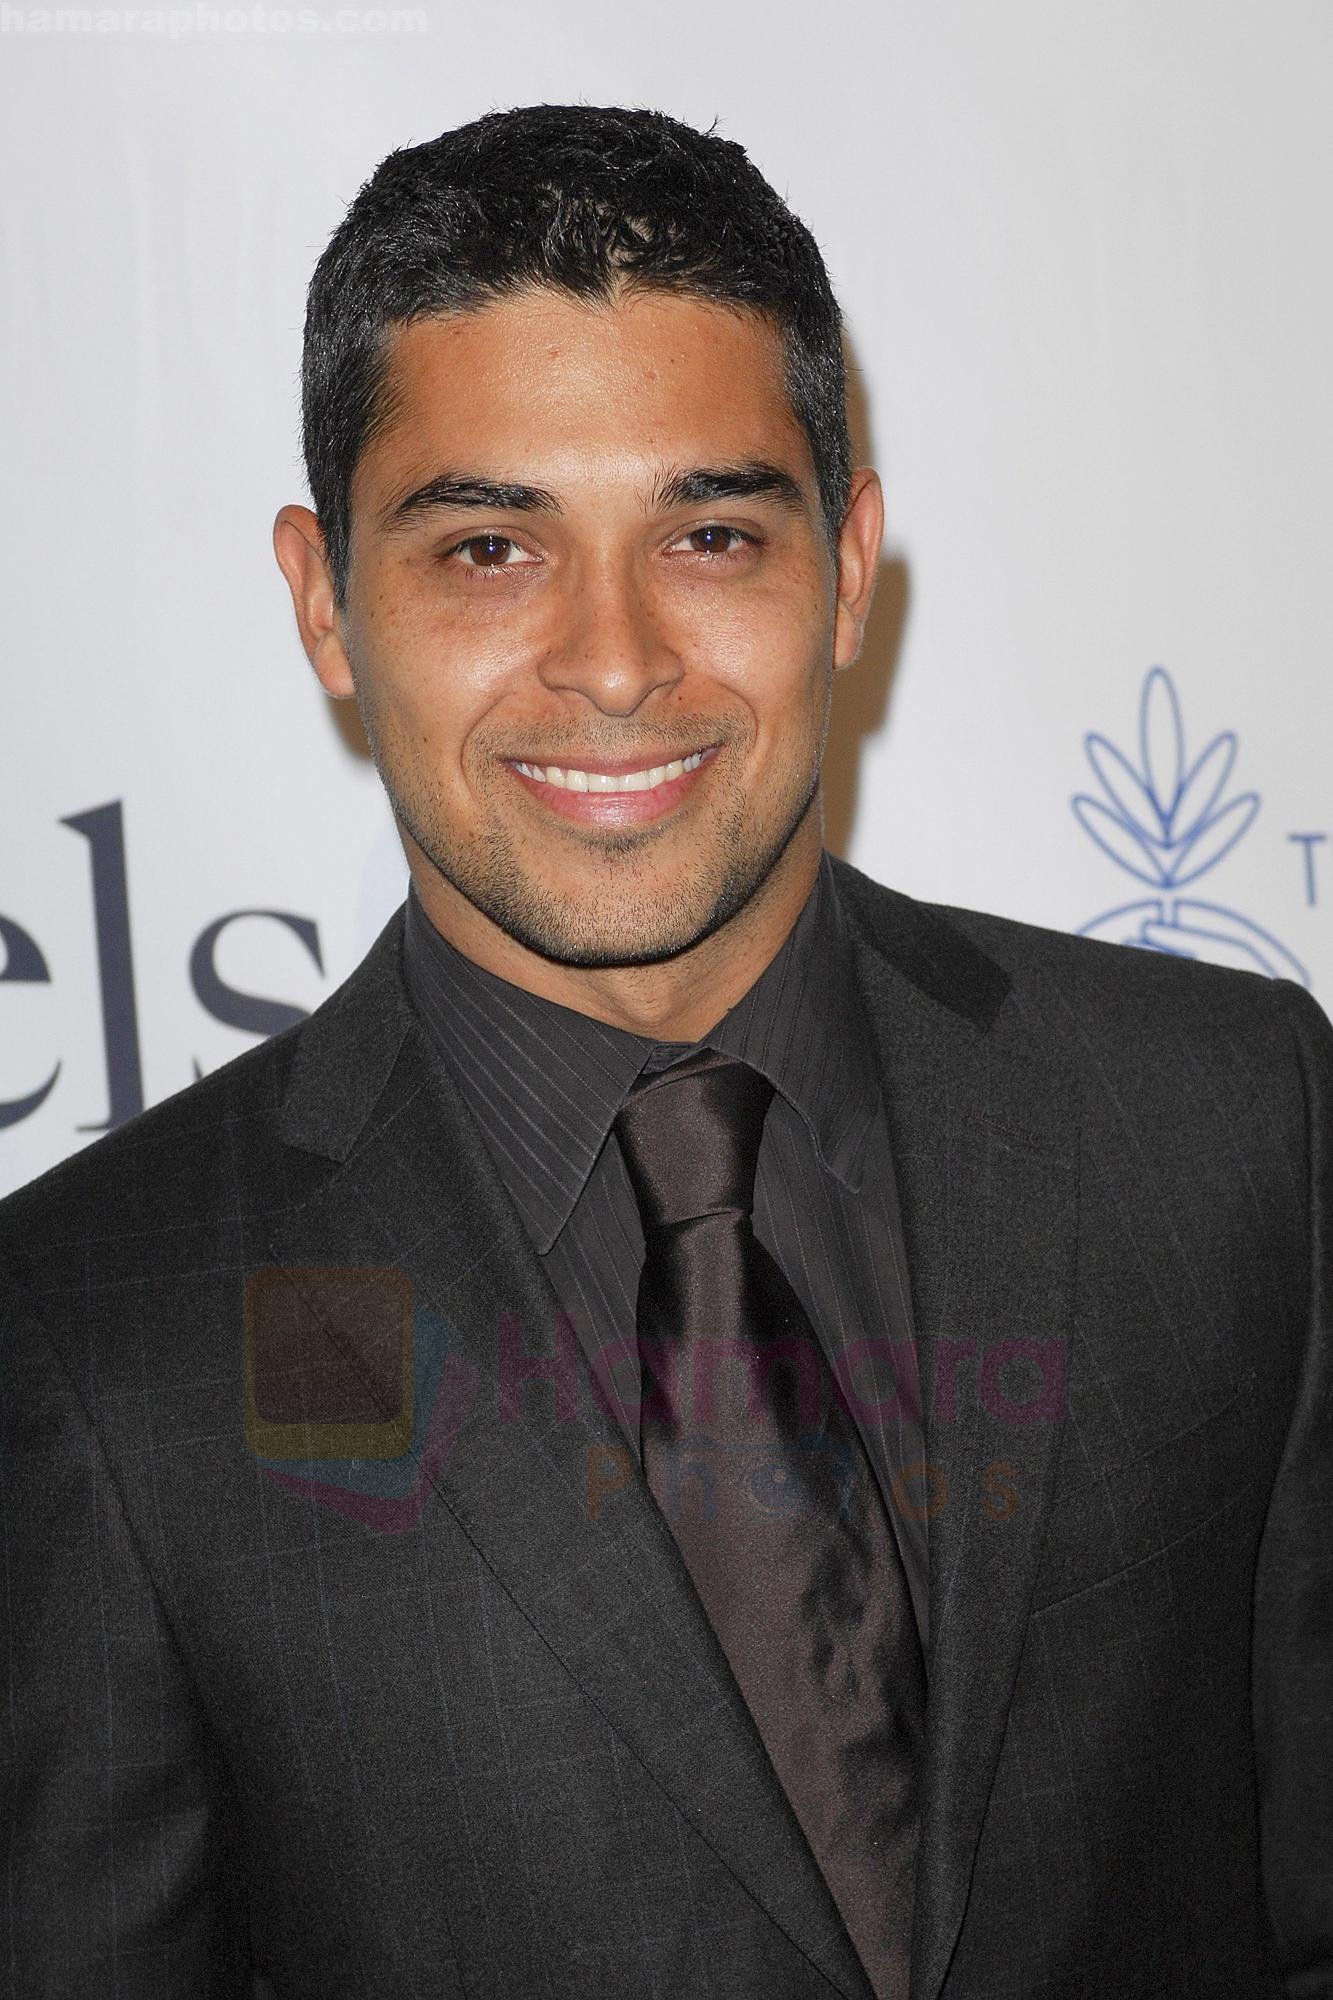 Wilmer Valderrama at the 24th Annual Imagen Awards held at the Beverly Hilton Hotel Los Angeles, California on 21.08.09 - IANS-WENN